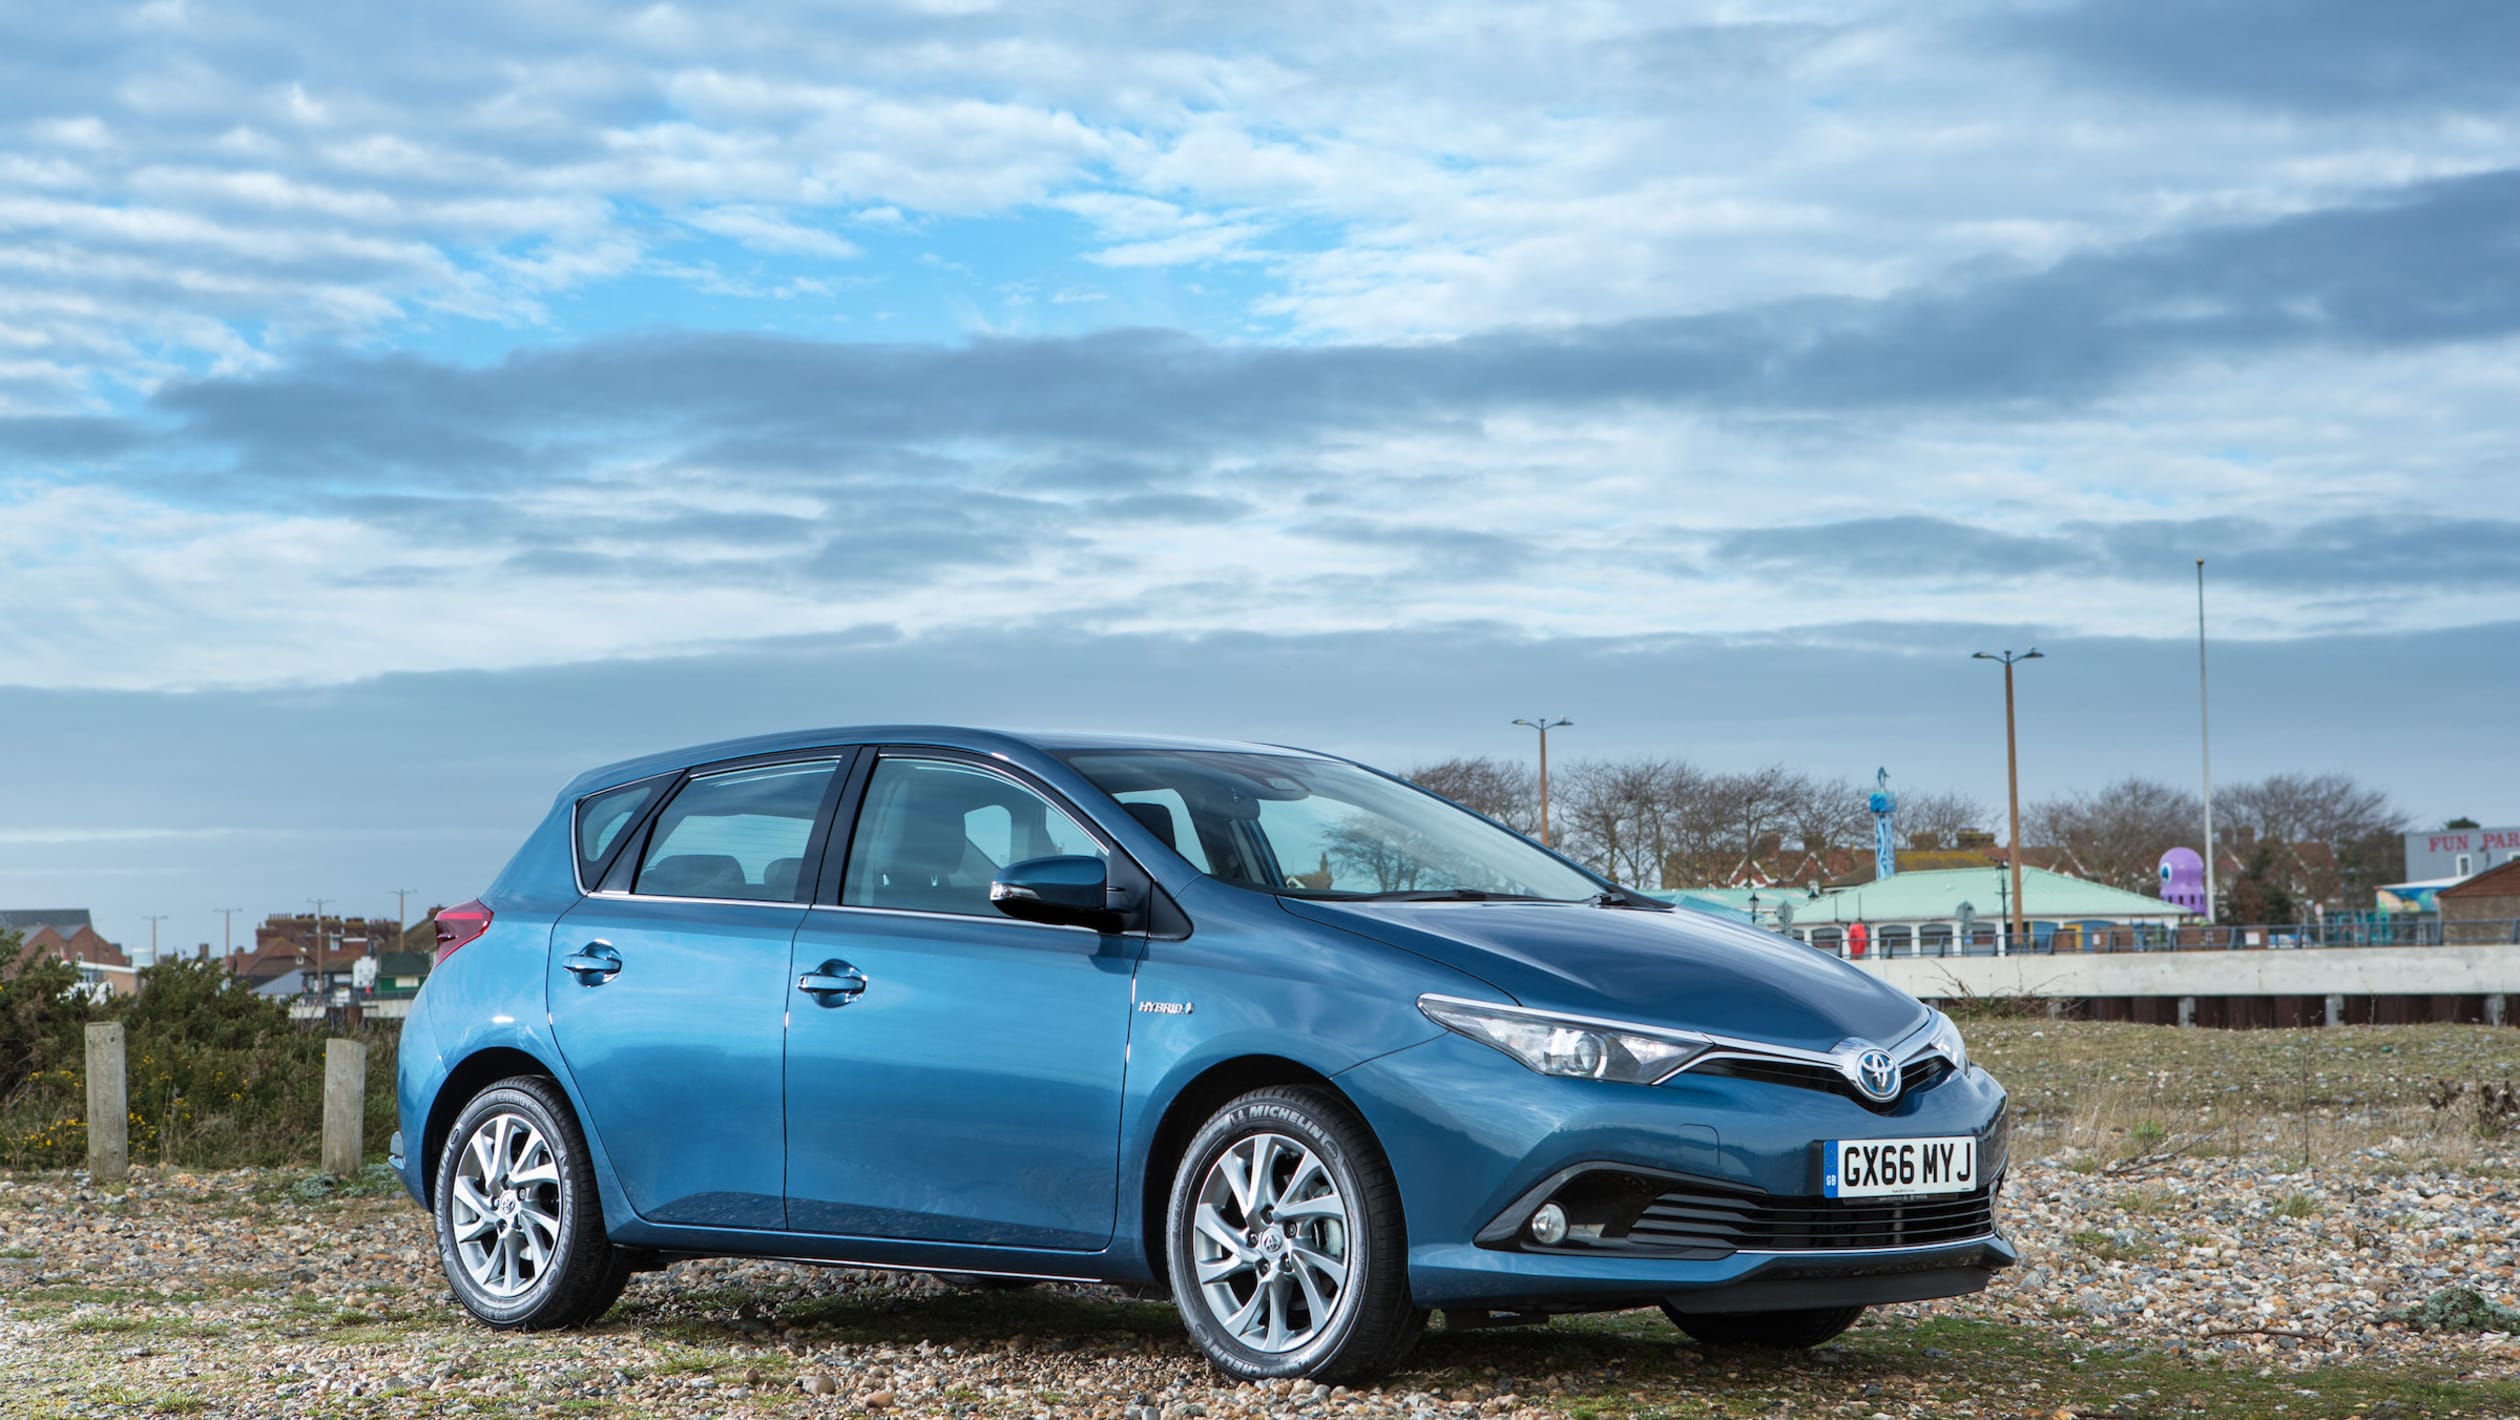 Toyota Auris Hybrid 2017 pictures Carbuyer